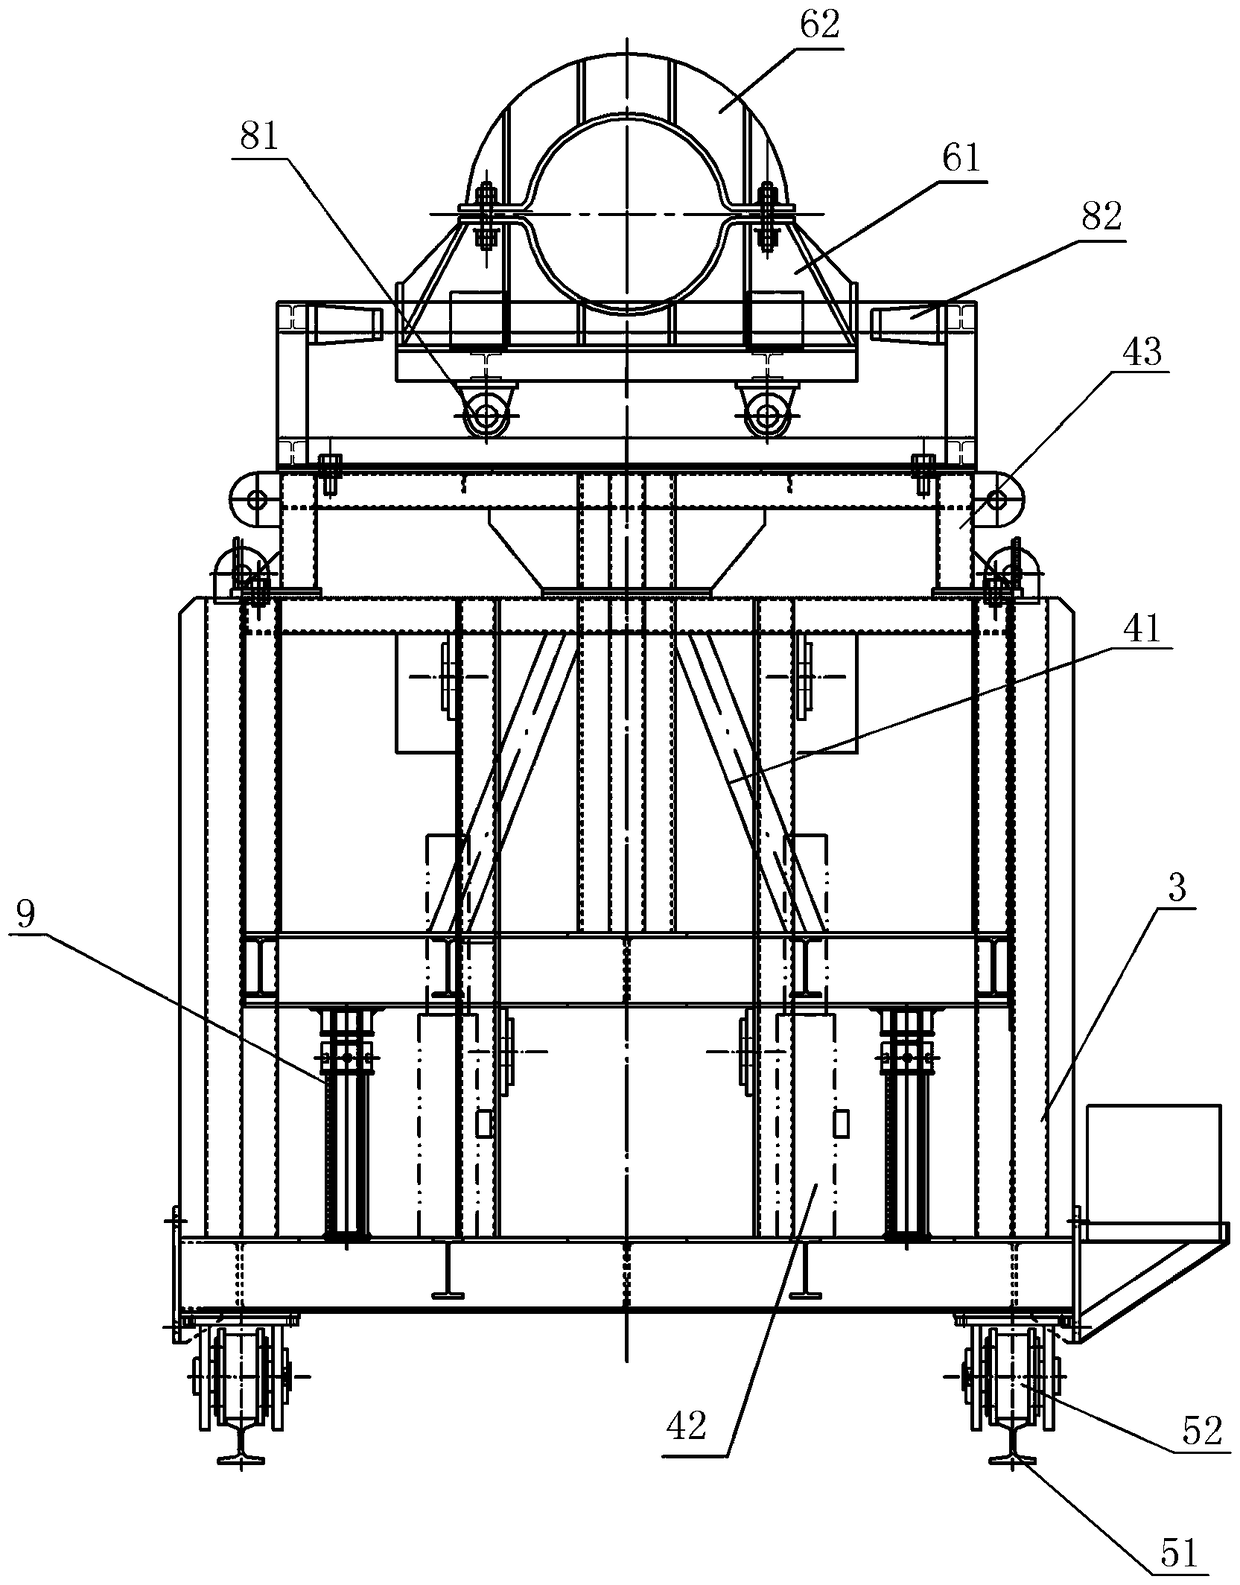 A method for installing a ship stern shaft